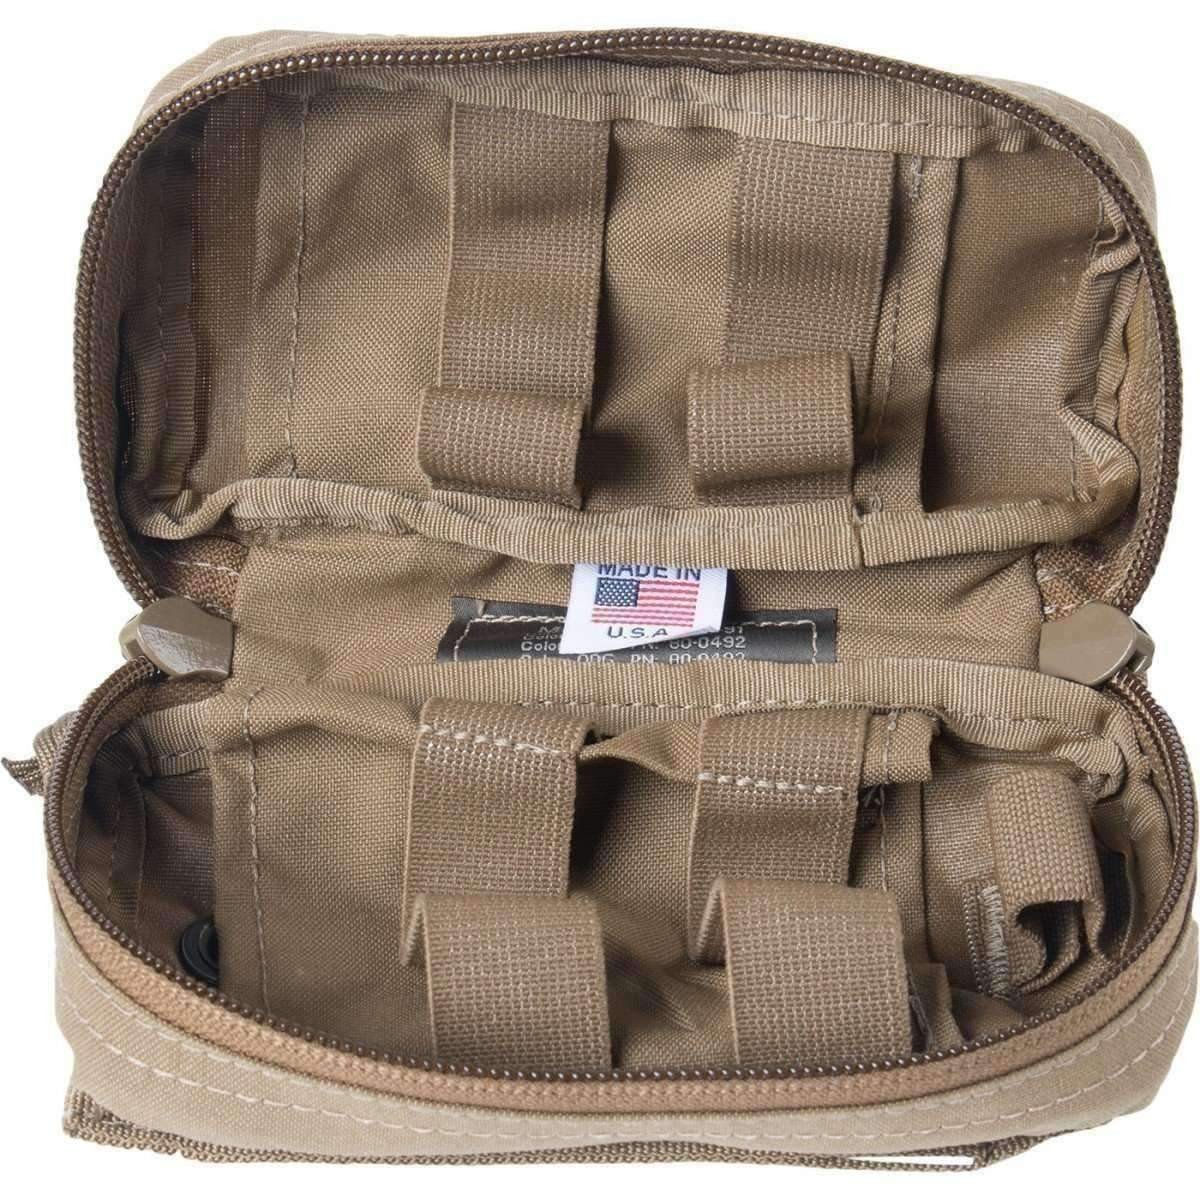 NAR M-FAK Mini First Aid Kit Pouch - MED-TAC International Corp. - North American Rescue